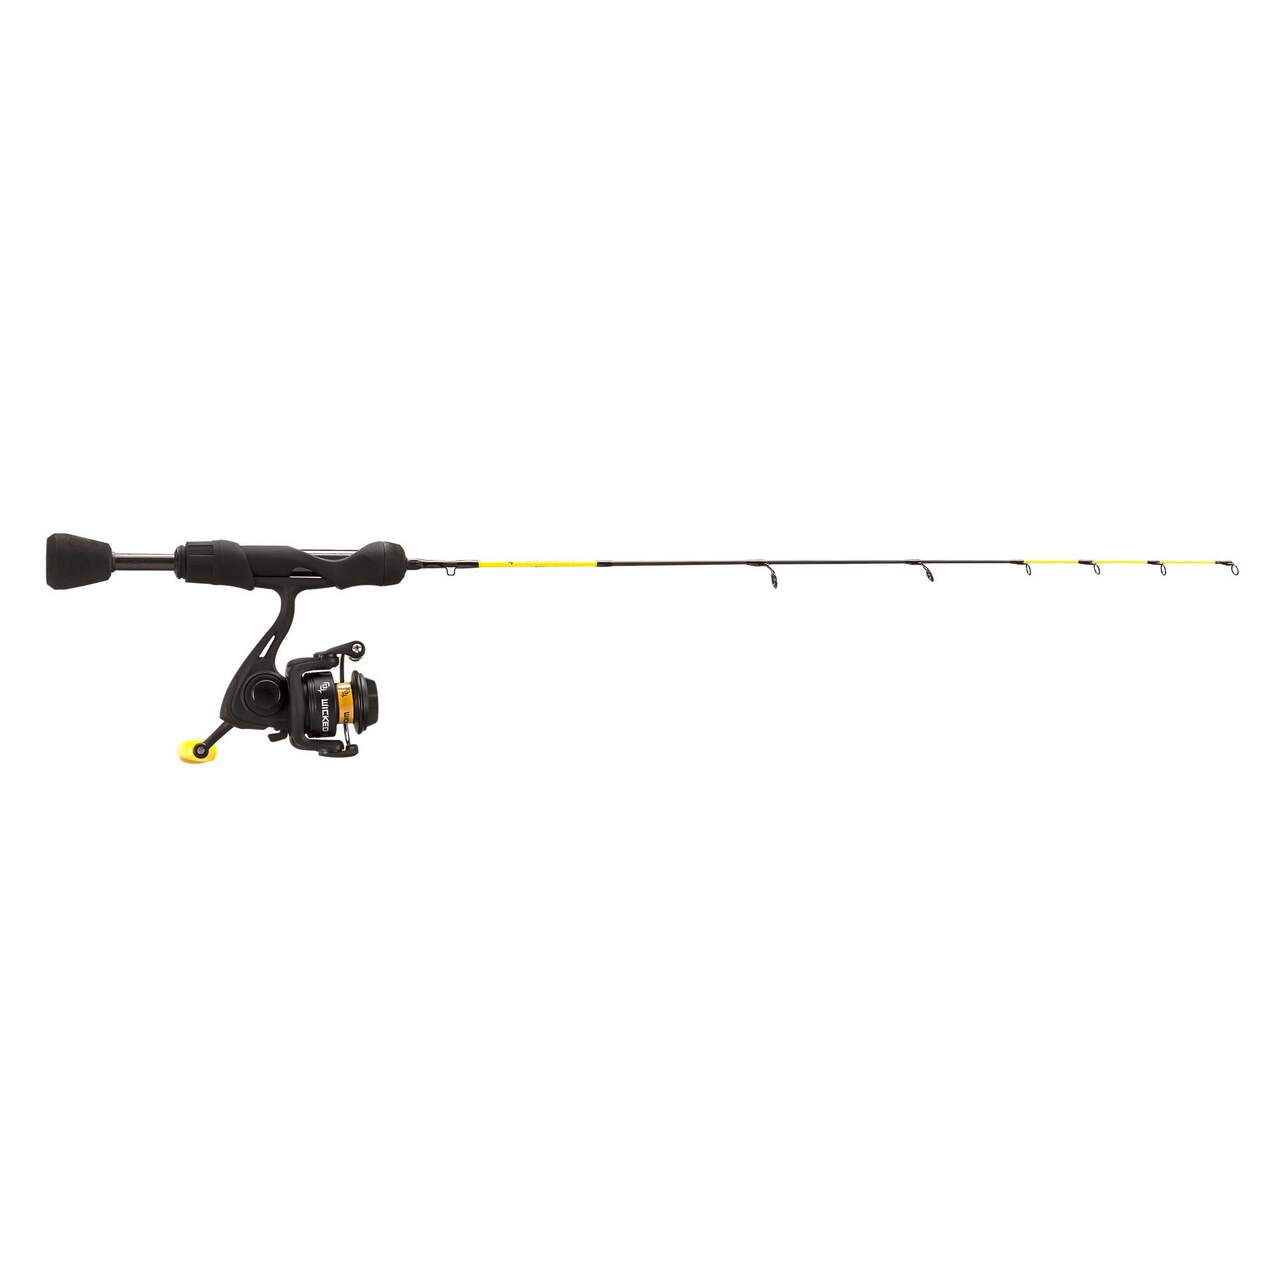 https://media-www.canadiantire.ca/product/playing/fishing/ice-fishing/1785372/13f-wicked-ice-hornet-combo-26-ml-591de36b-1ada-4ab2-9d9c-4455c90edc4f-jpgrendition.jpg?imdensity=1&imwidth=1244&impolicy=mZoom